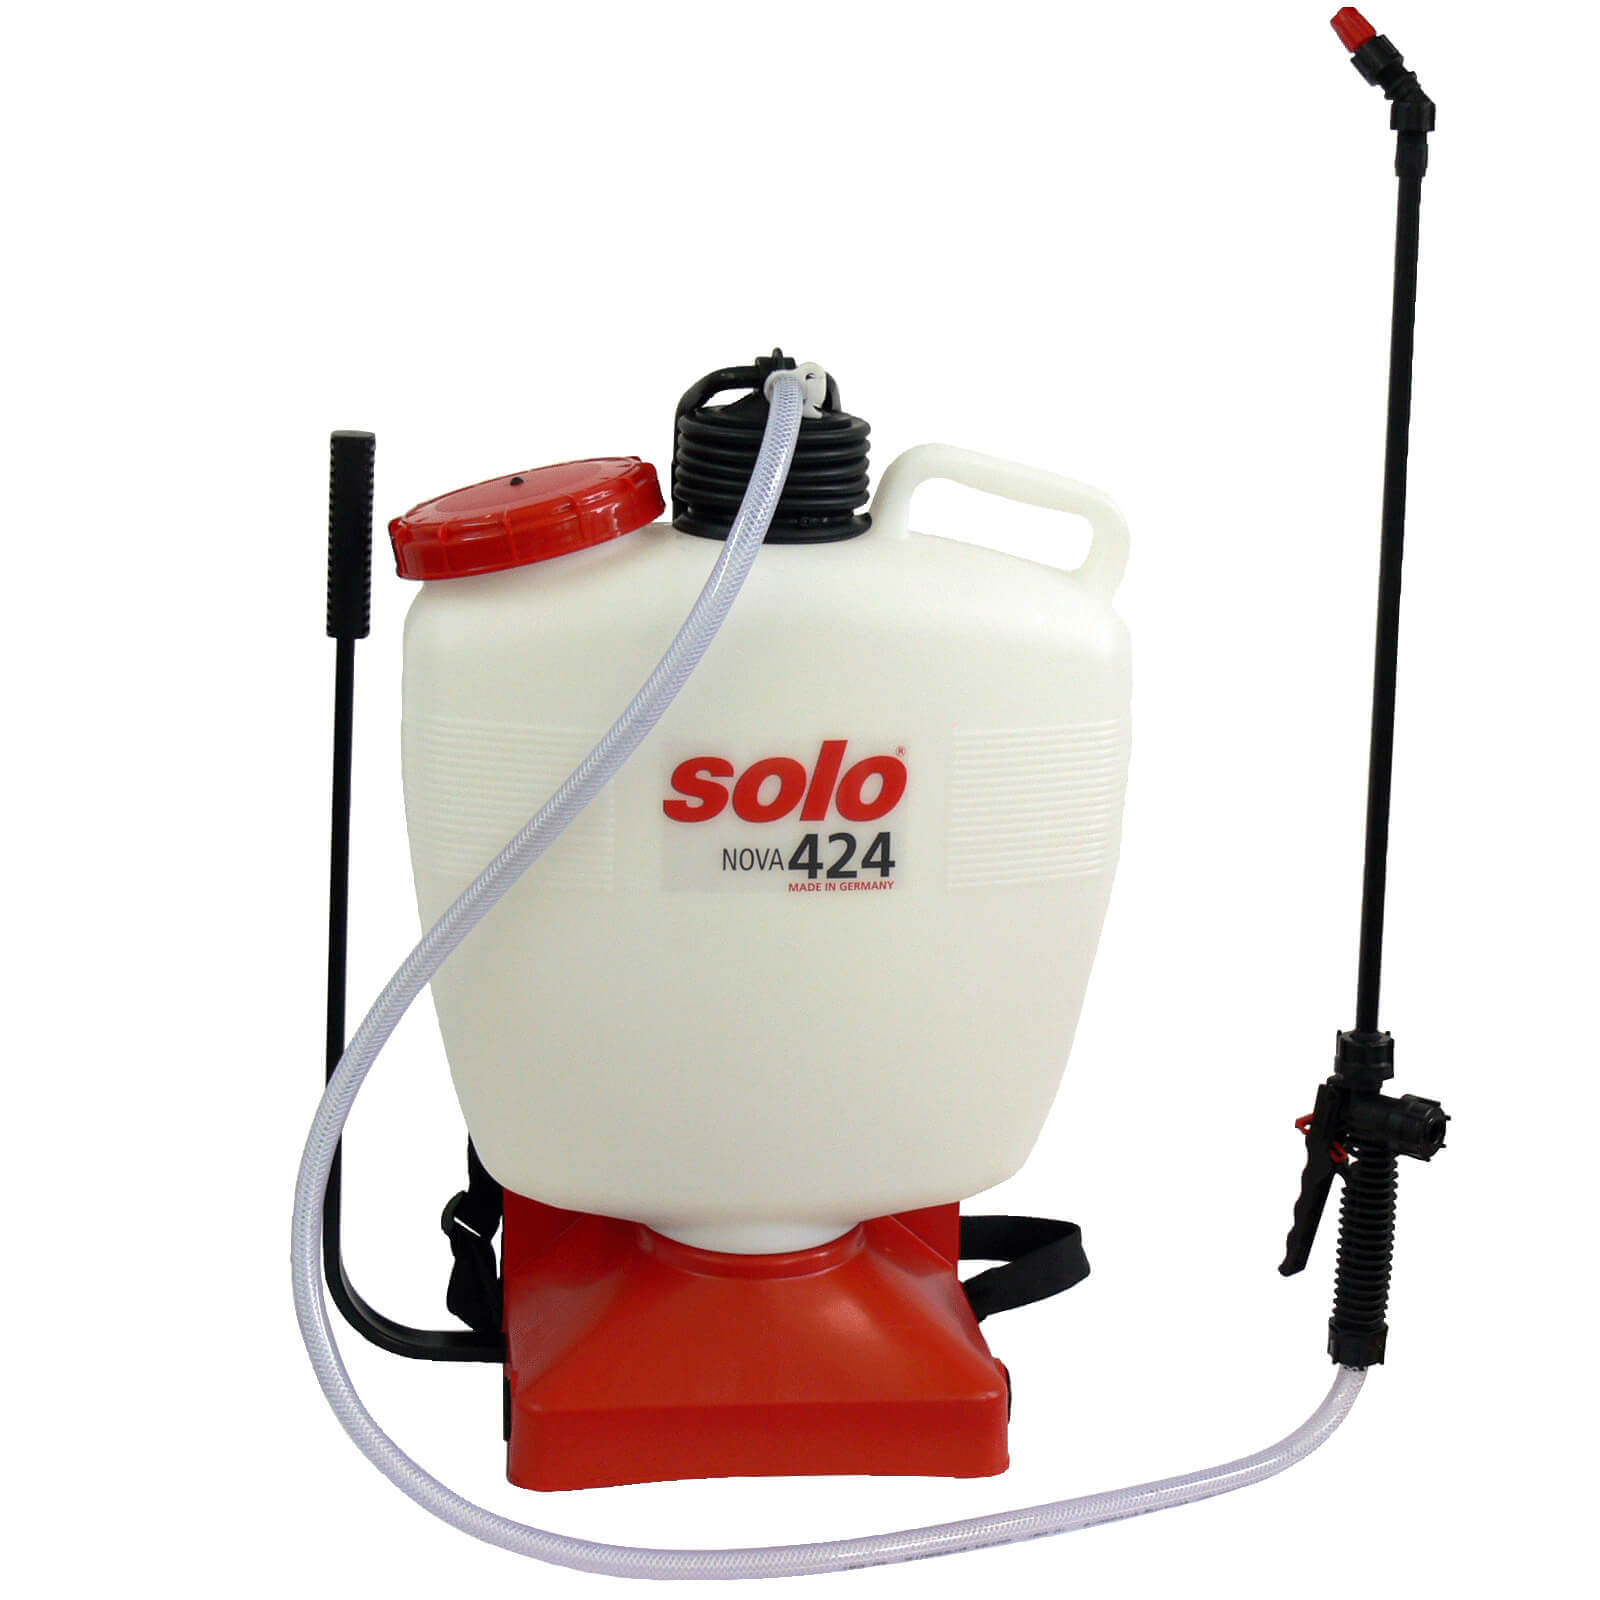 Solo 424 NOVA CLASSIC Backpack Chemical and Water Pressure Sprayer 16l